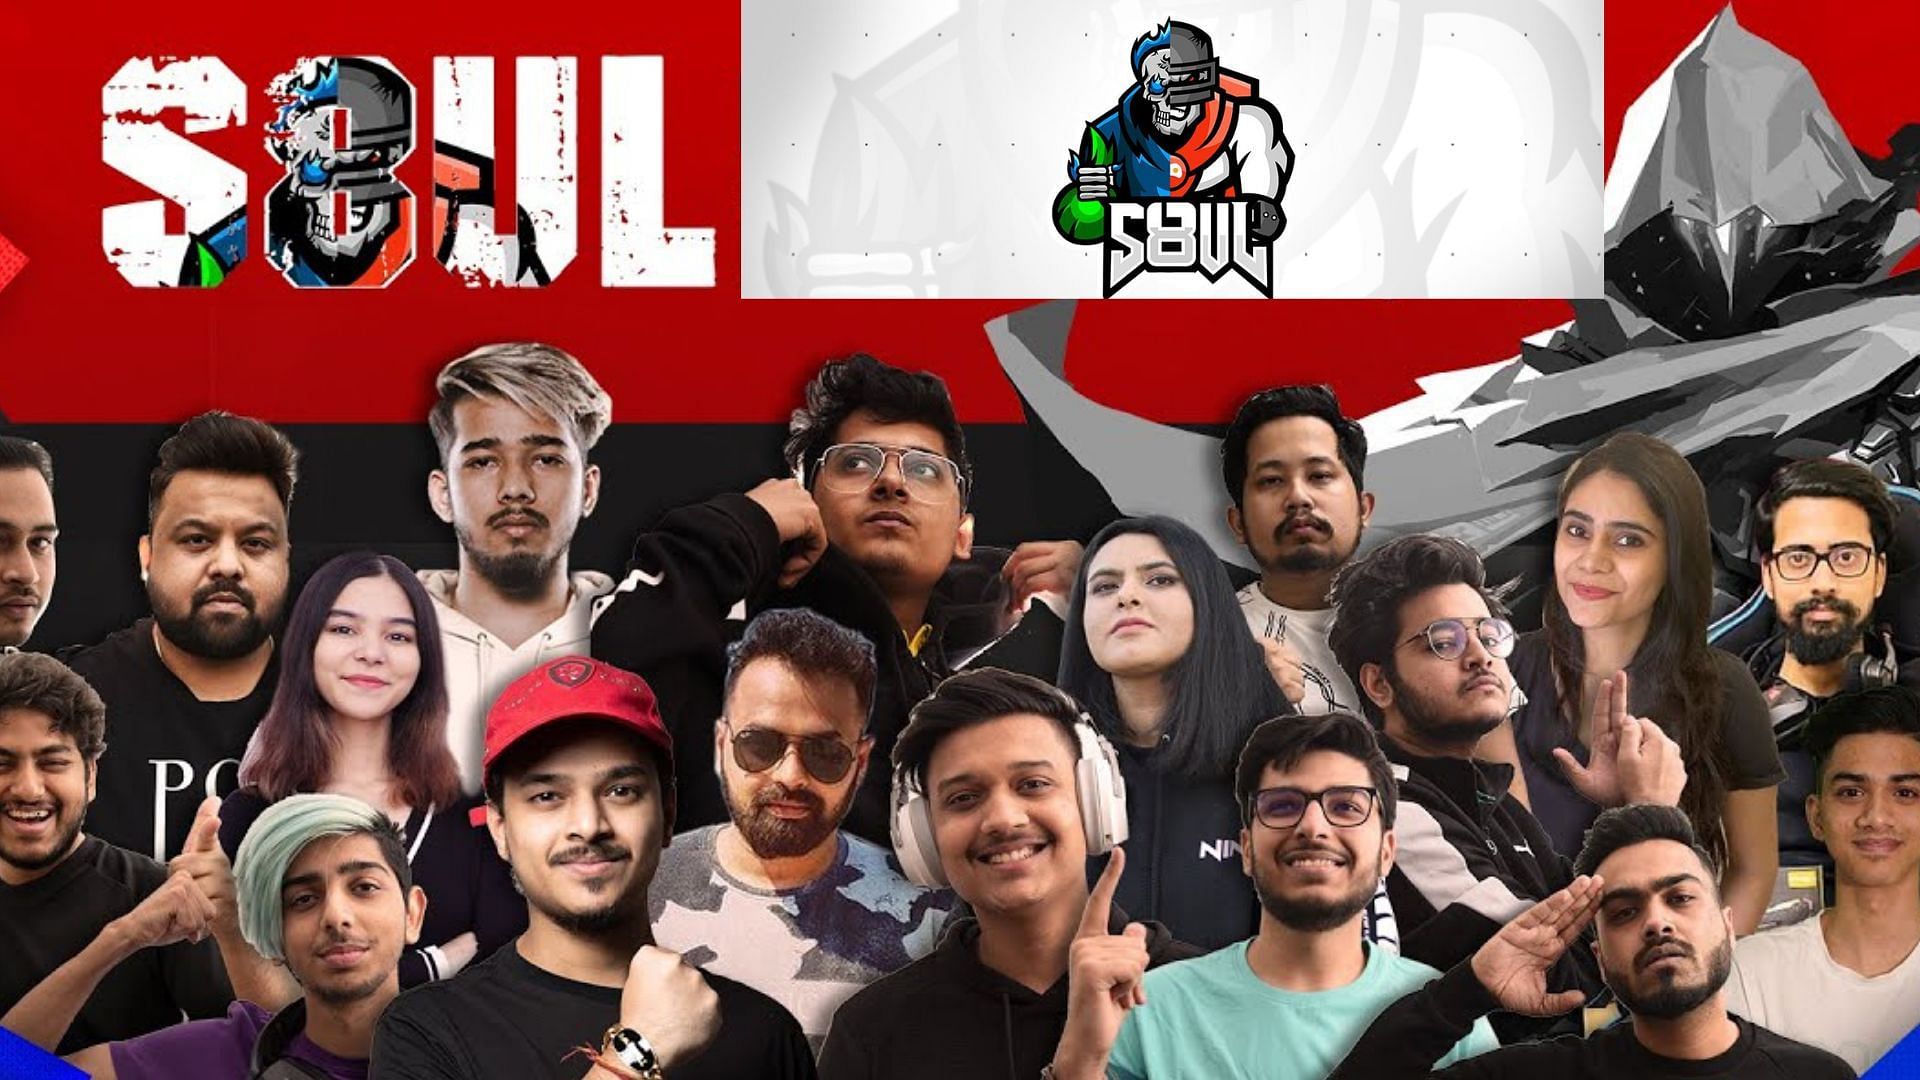 S8UL nominated for Content Group of the Year (Image via Sportskeeda)